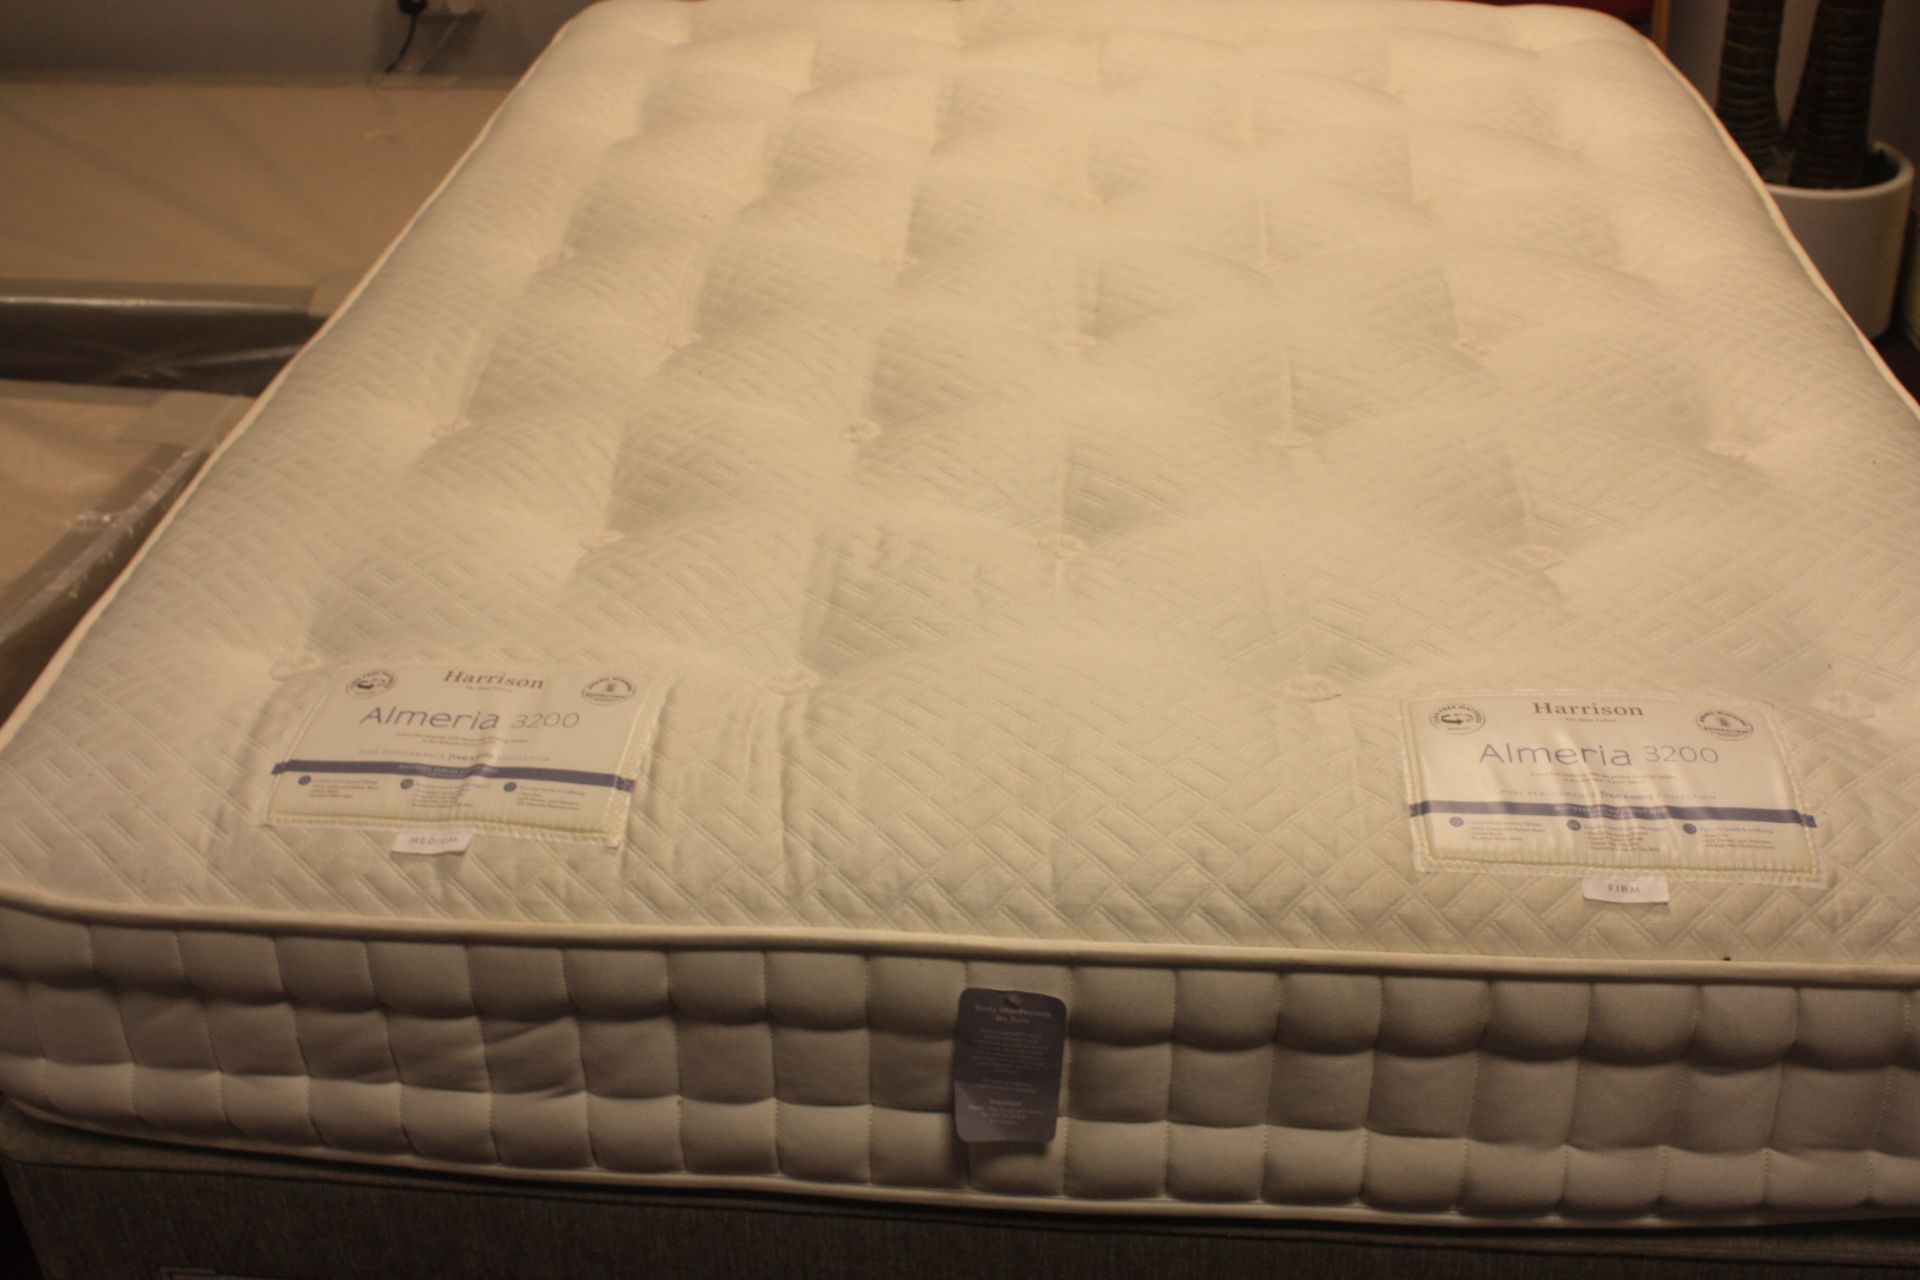 HARRISONS 150CM KING SIZE DIVAN WITH ALMEIRA 3200 MATTRESS DUAL FIRMNESS RRP £1200 - Image 2 of 3